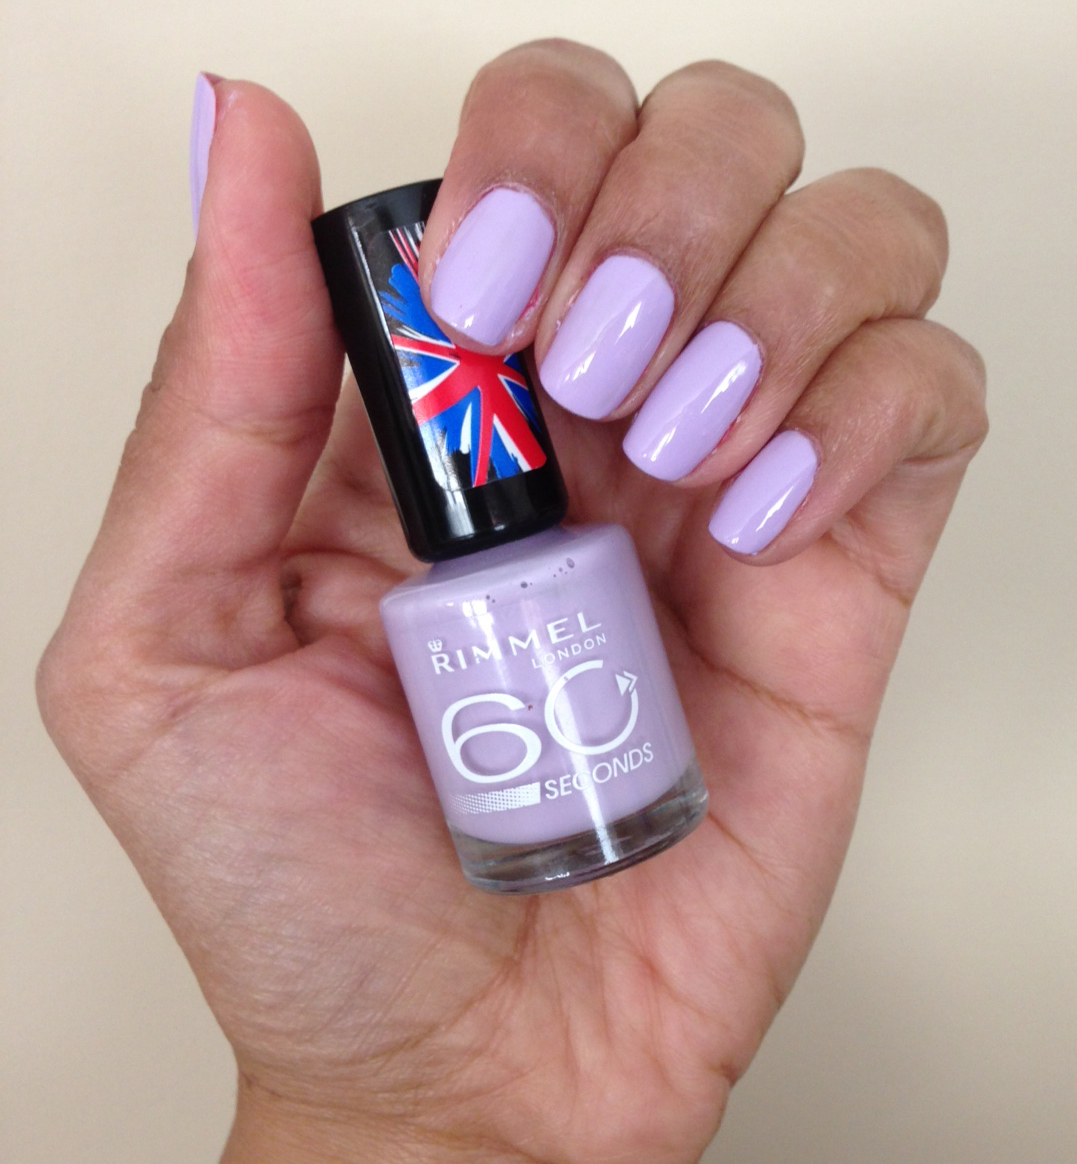 Swatch: Rimmel 60 Seconds Nail Polish in Sweet Lavender | Canadian Beauty